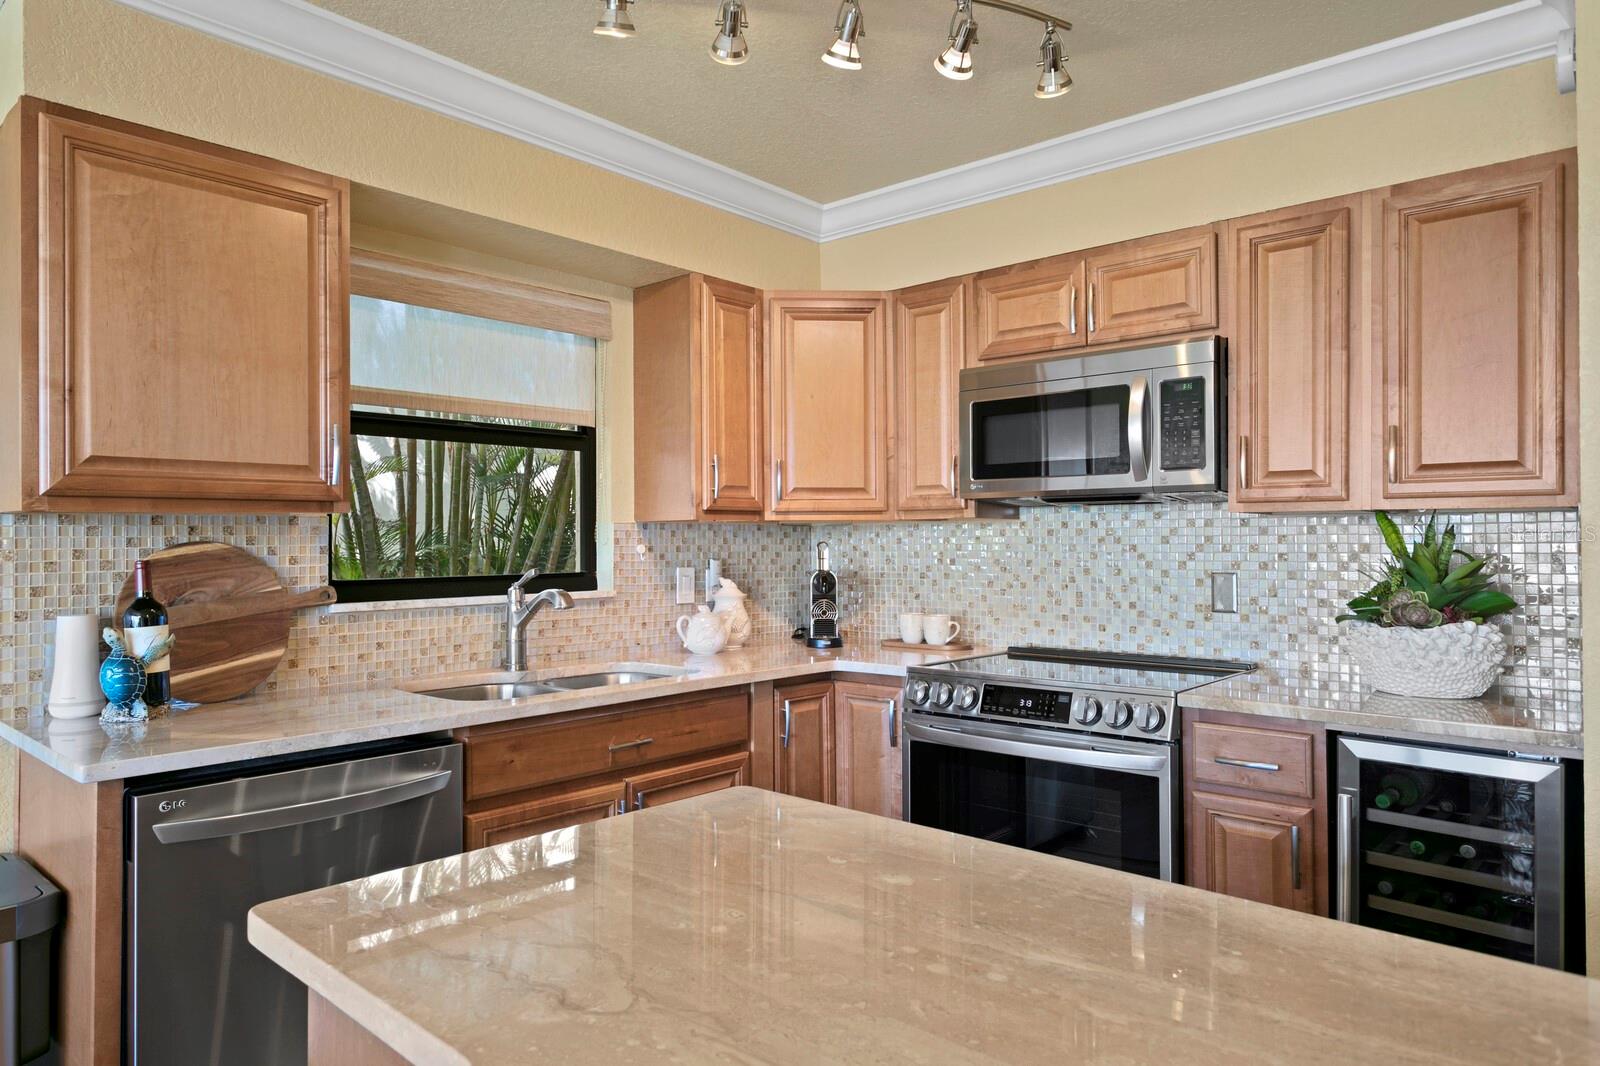 Kitchen window enhances the natural Florida lighting throughout the space.